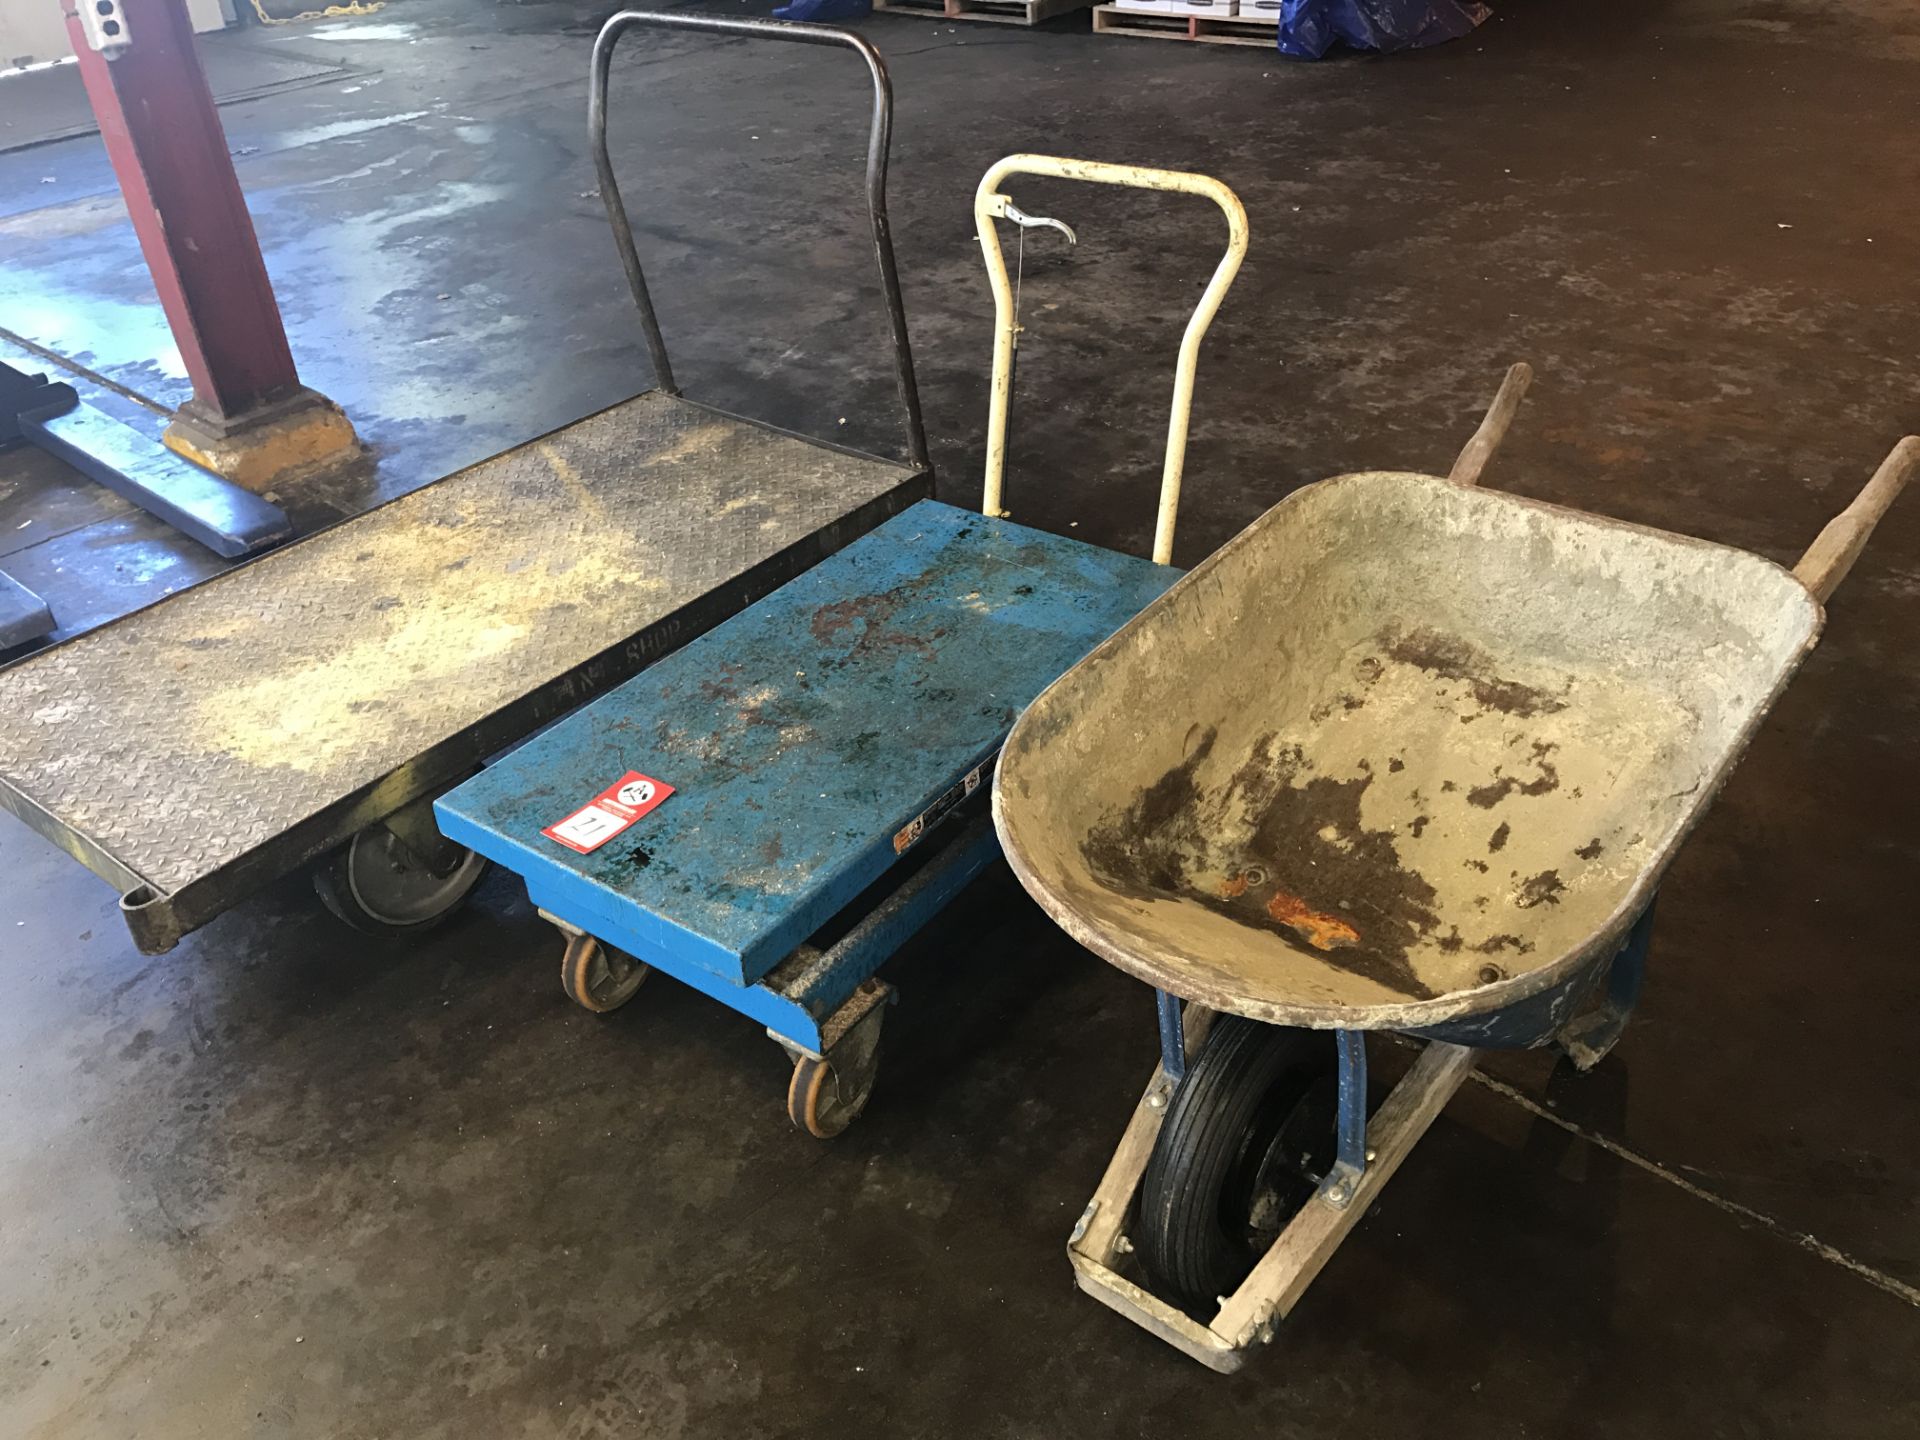 Lift Table Cart, Bishimon 40" x 20" lift table, 660 lbs. capacity, with steel shop cart and wheel